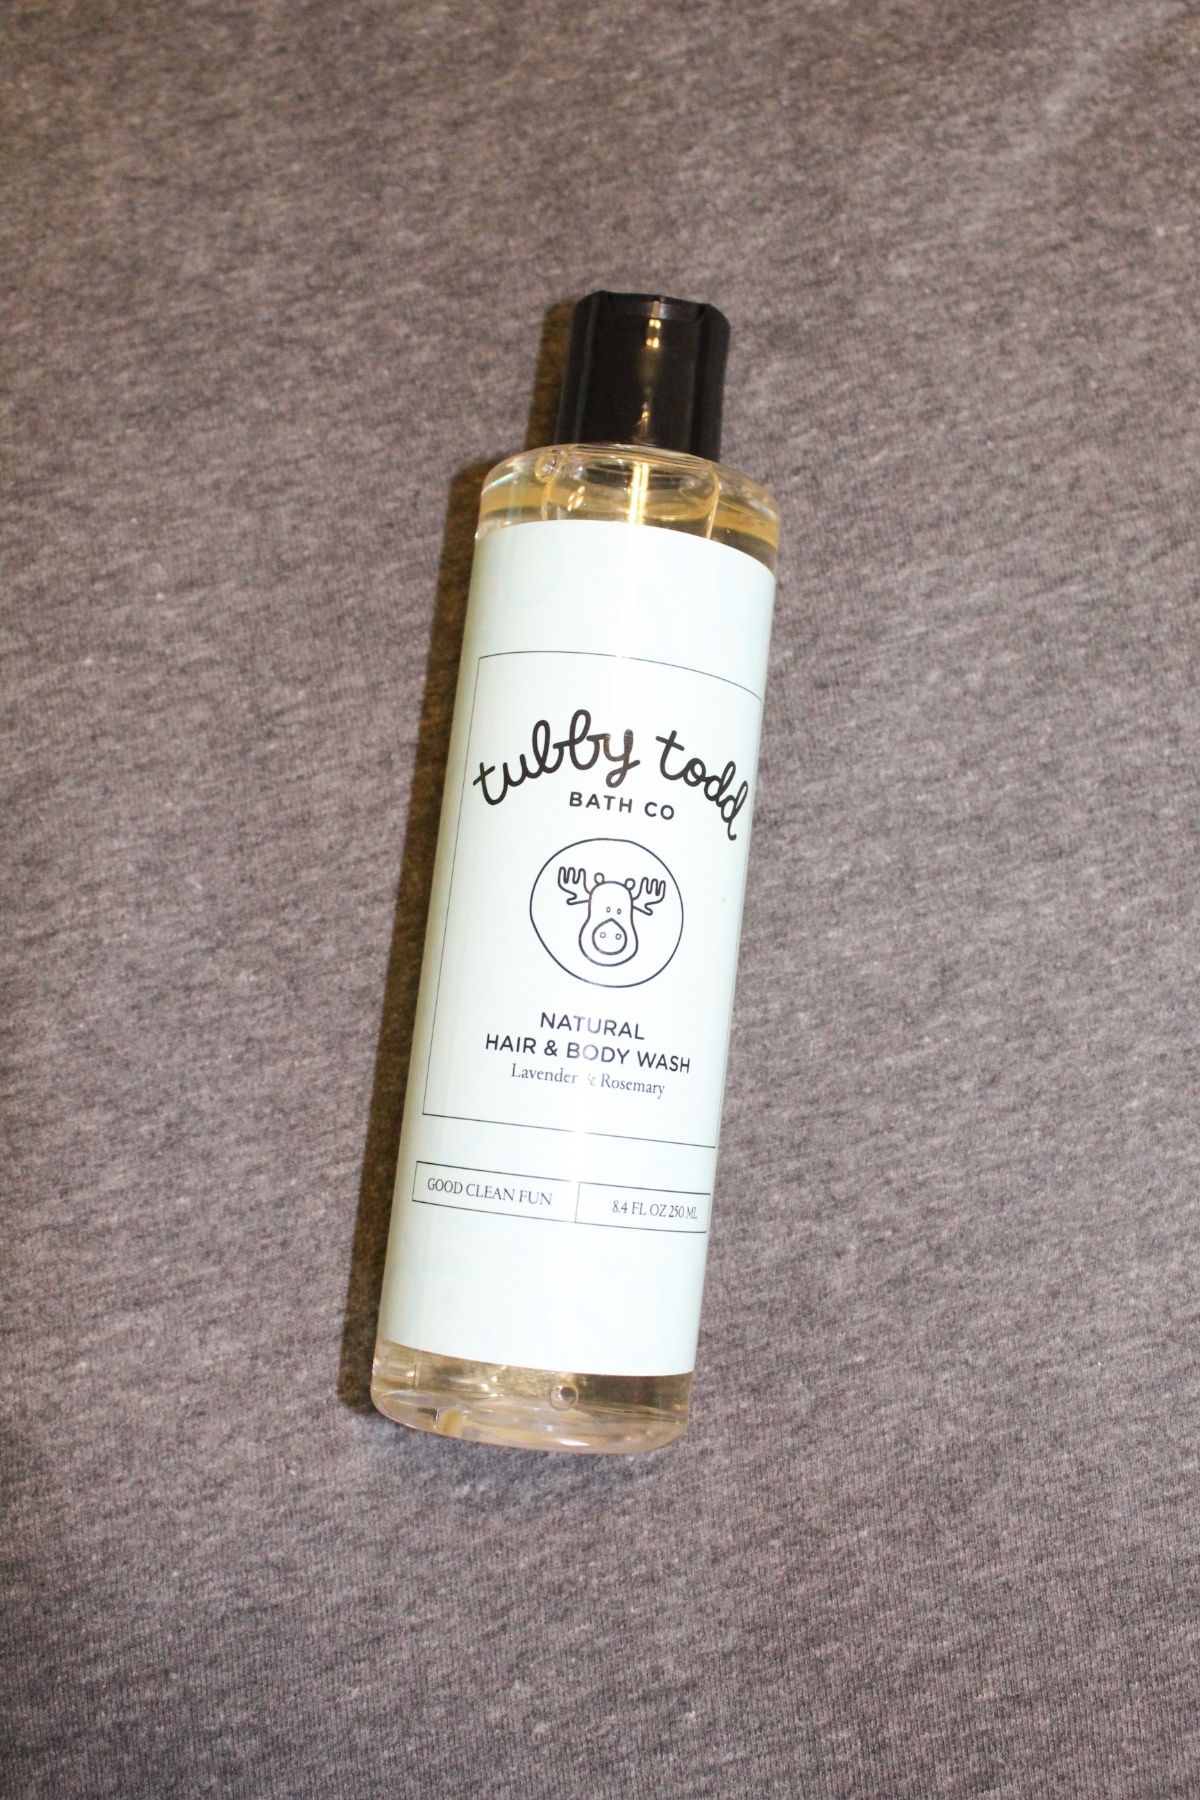 tubby todd hair and body wash lavender rosemary scent on a grey cloth background